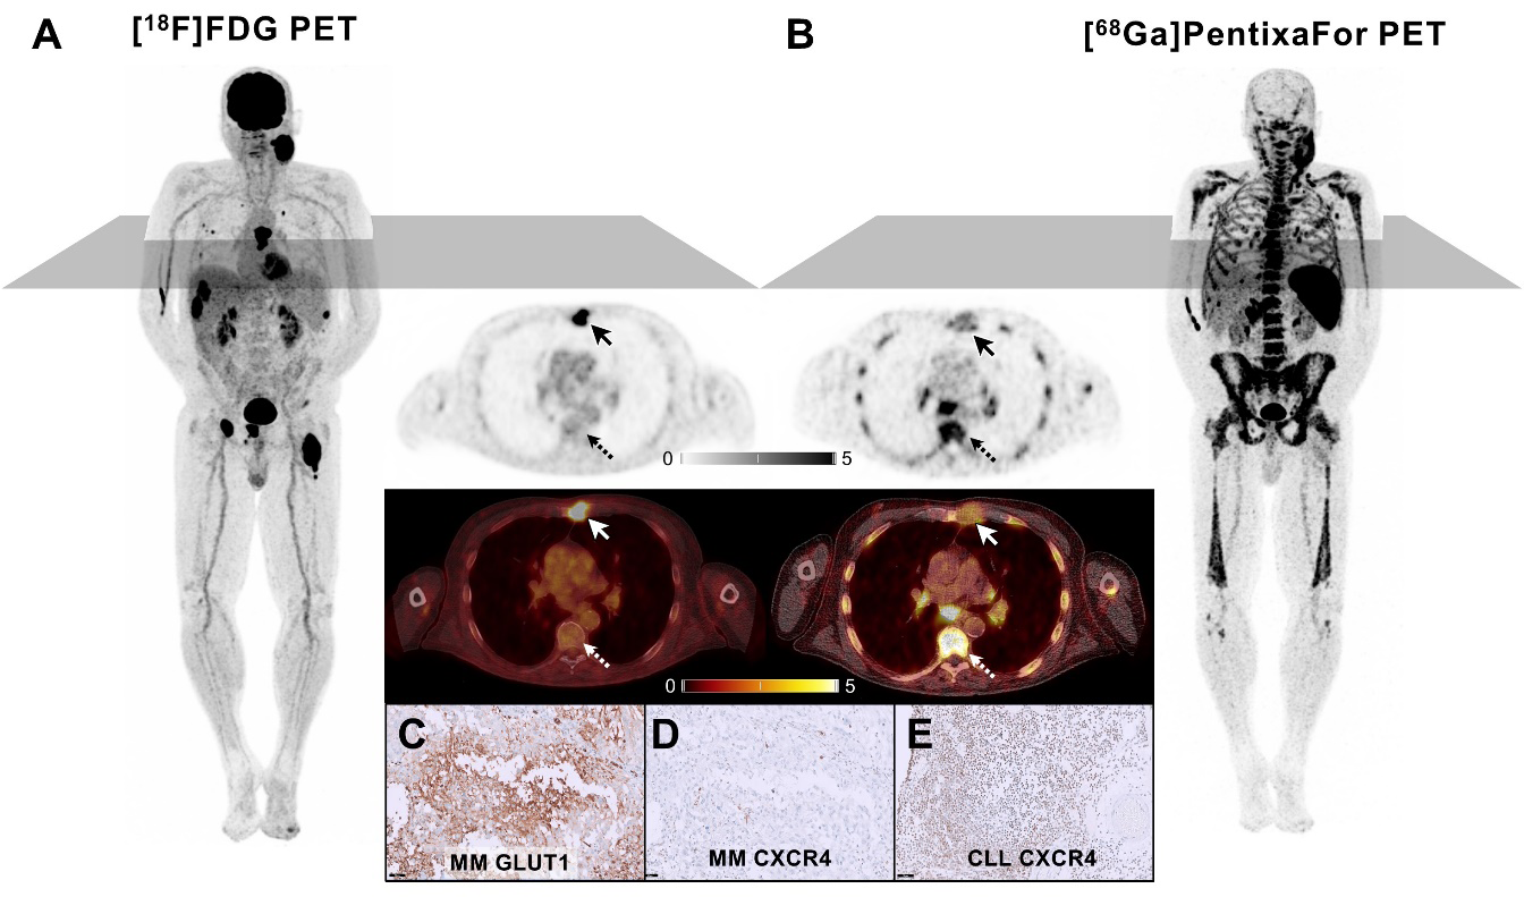 Disclosing tumor biology by means of molecular imaging in a patient with malignant melanoma and chronic lymphocytic leukemia